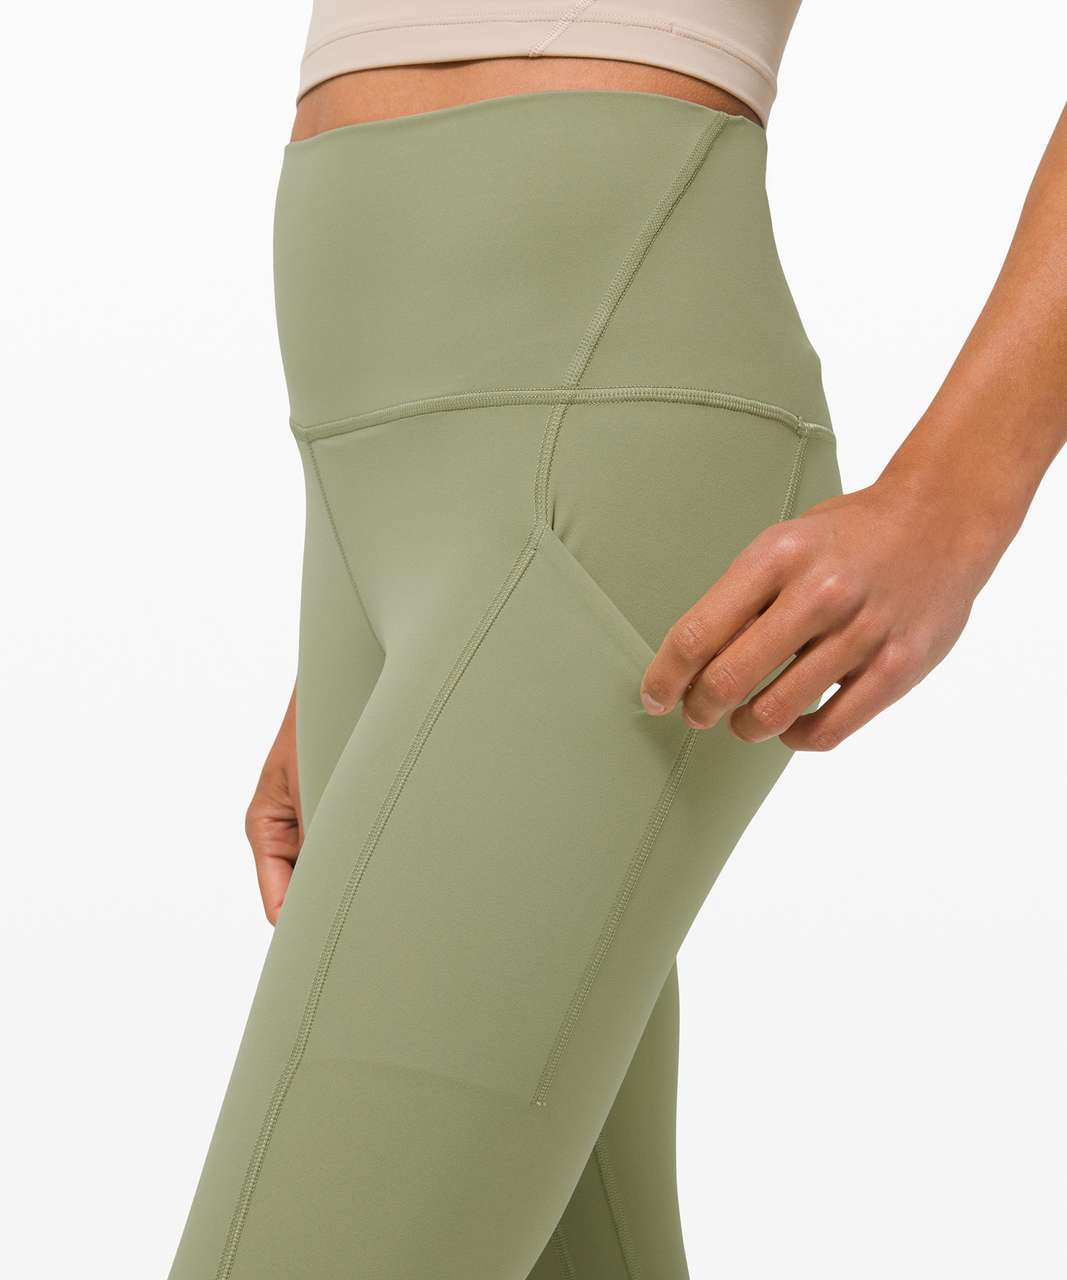 Lululemon Align High Rise Pant with Pockets 25" - Rosemary Green